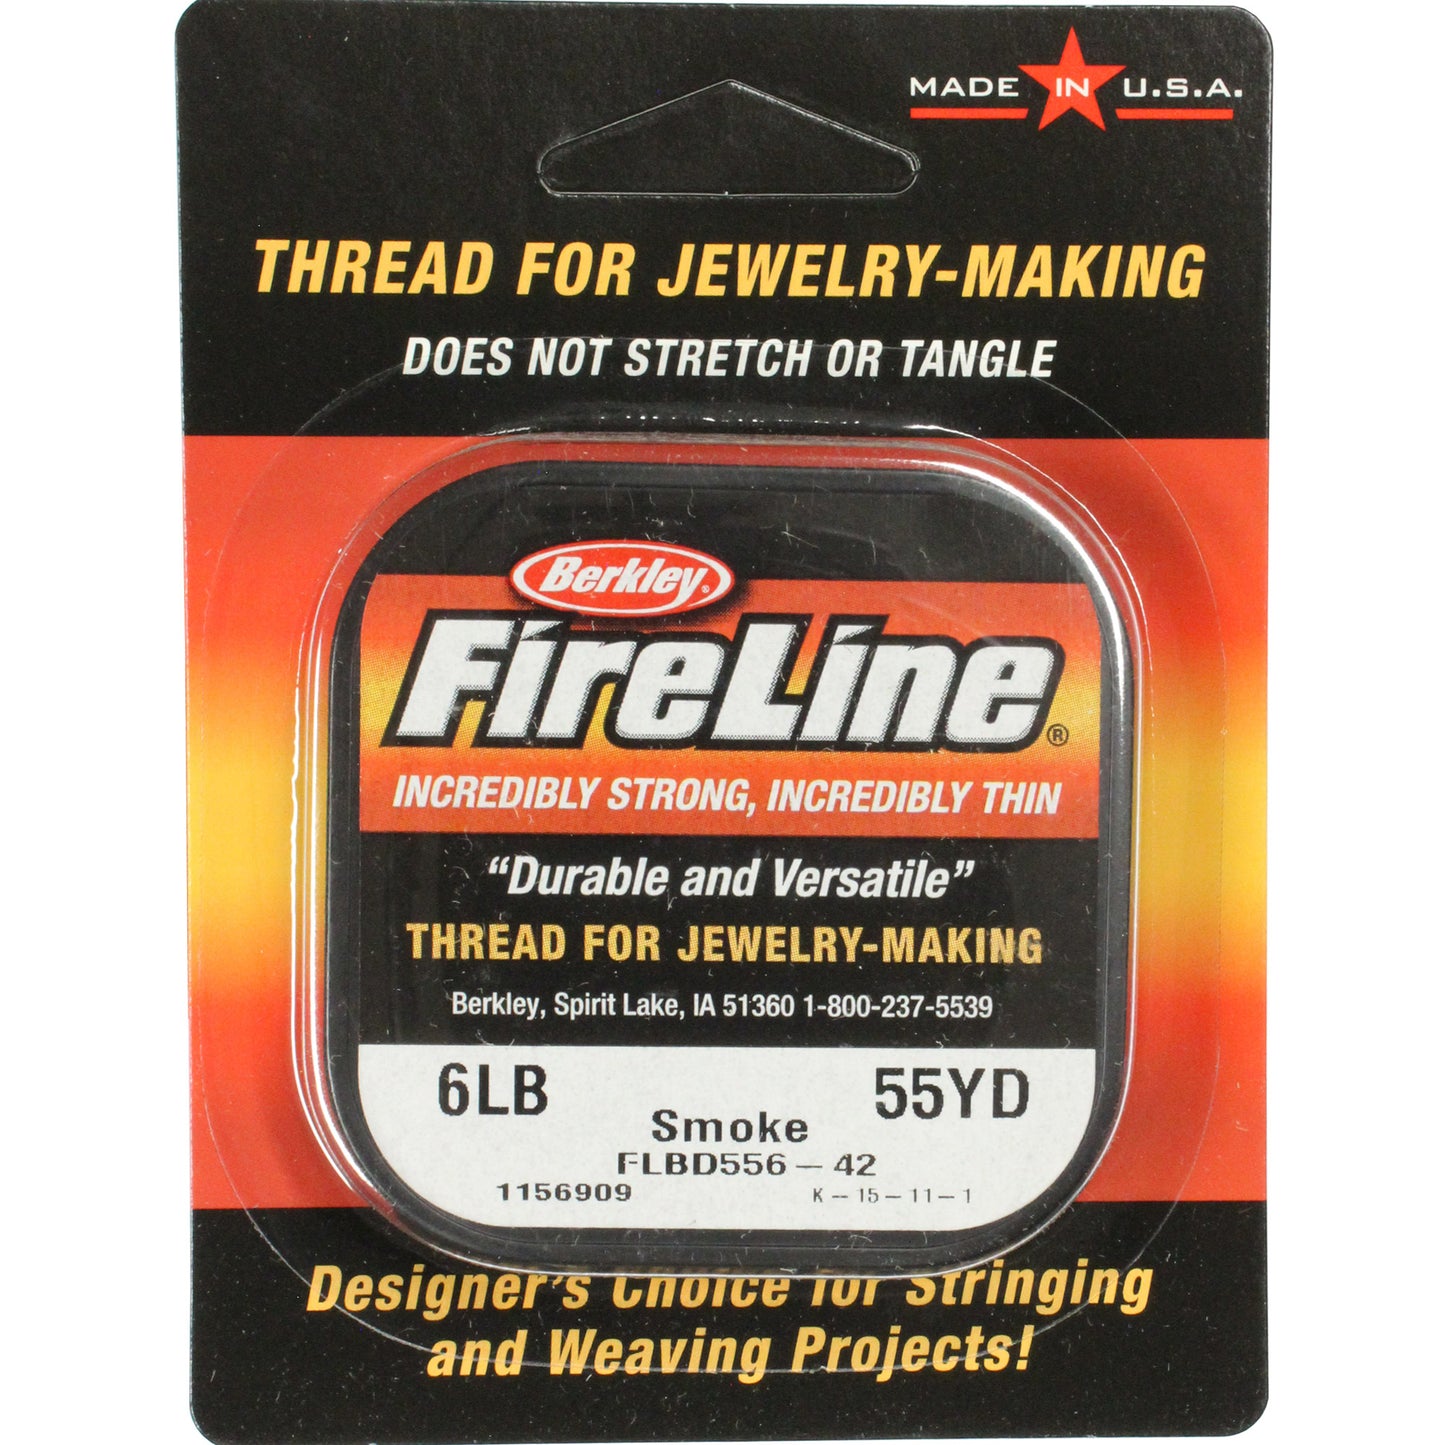 SMOKE Berkley Fireline Thread / 6 lb - 55 Yard Roll / for stringing and weaving projects